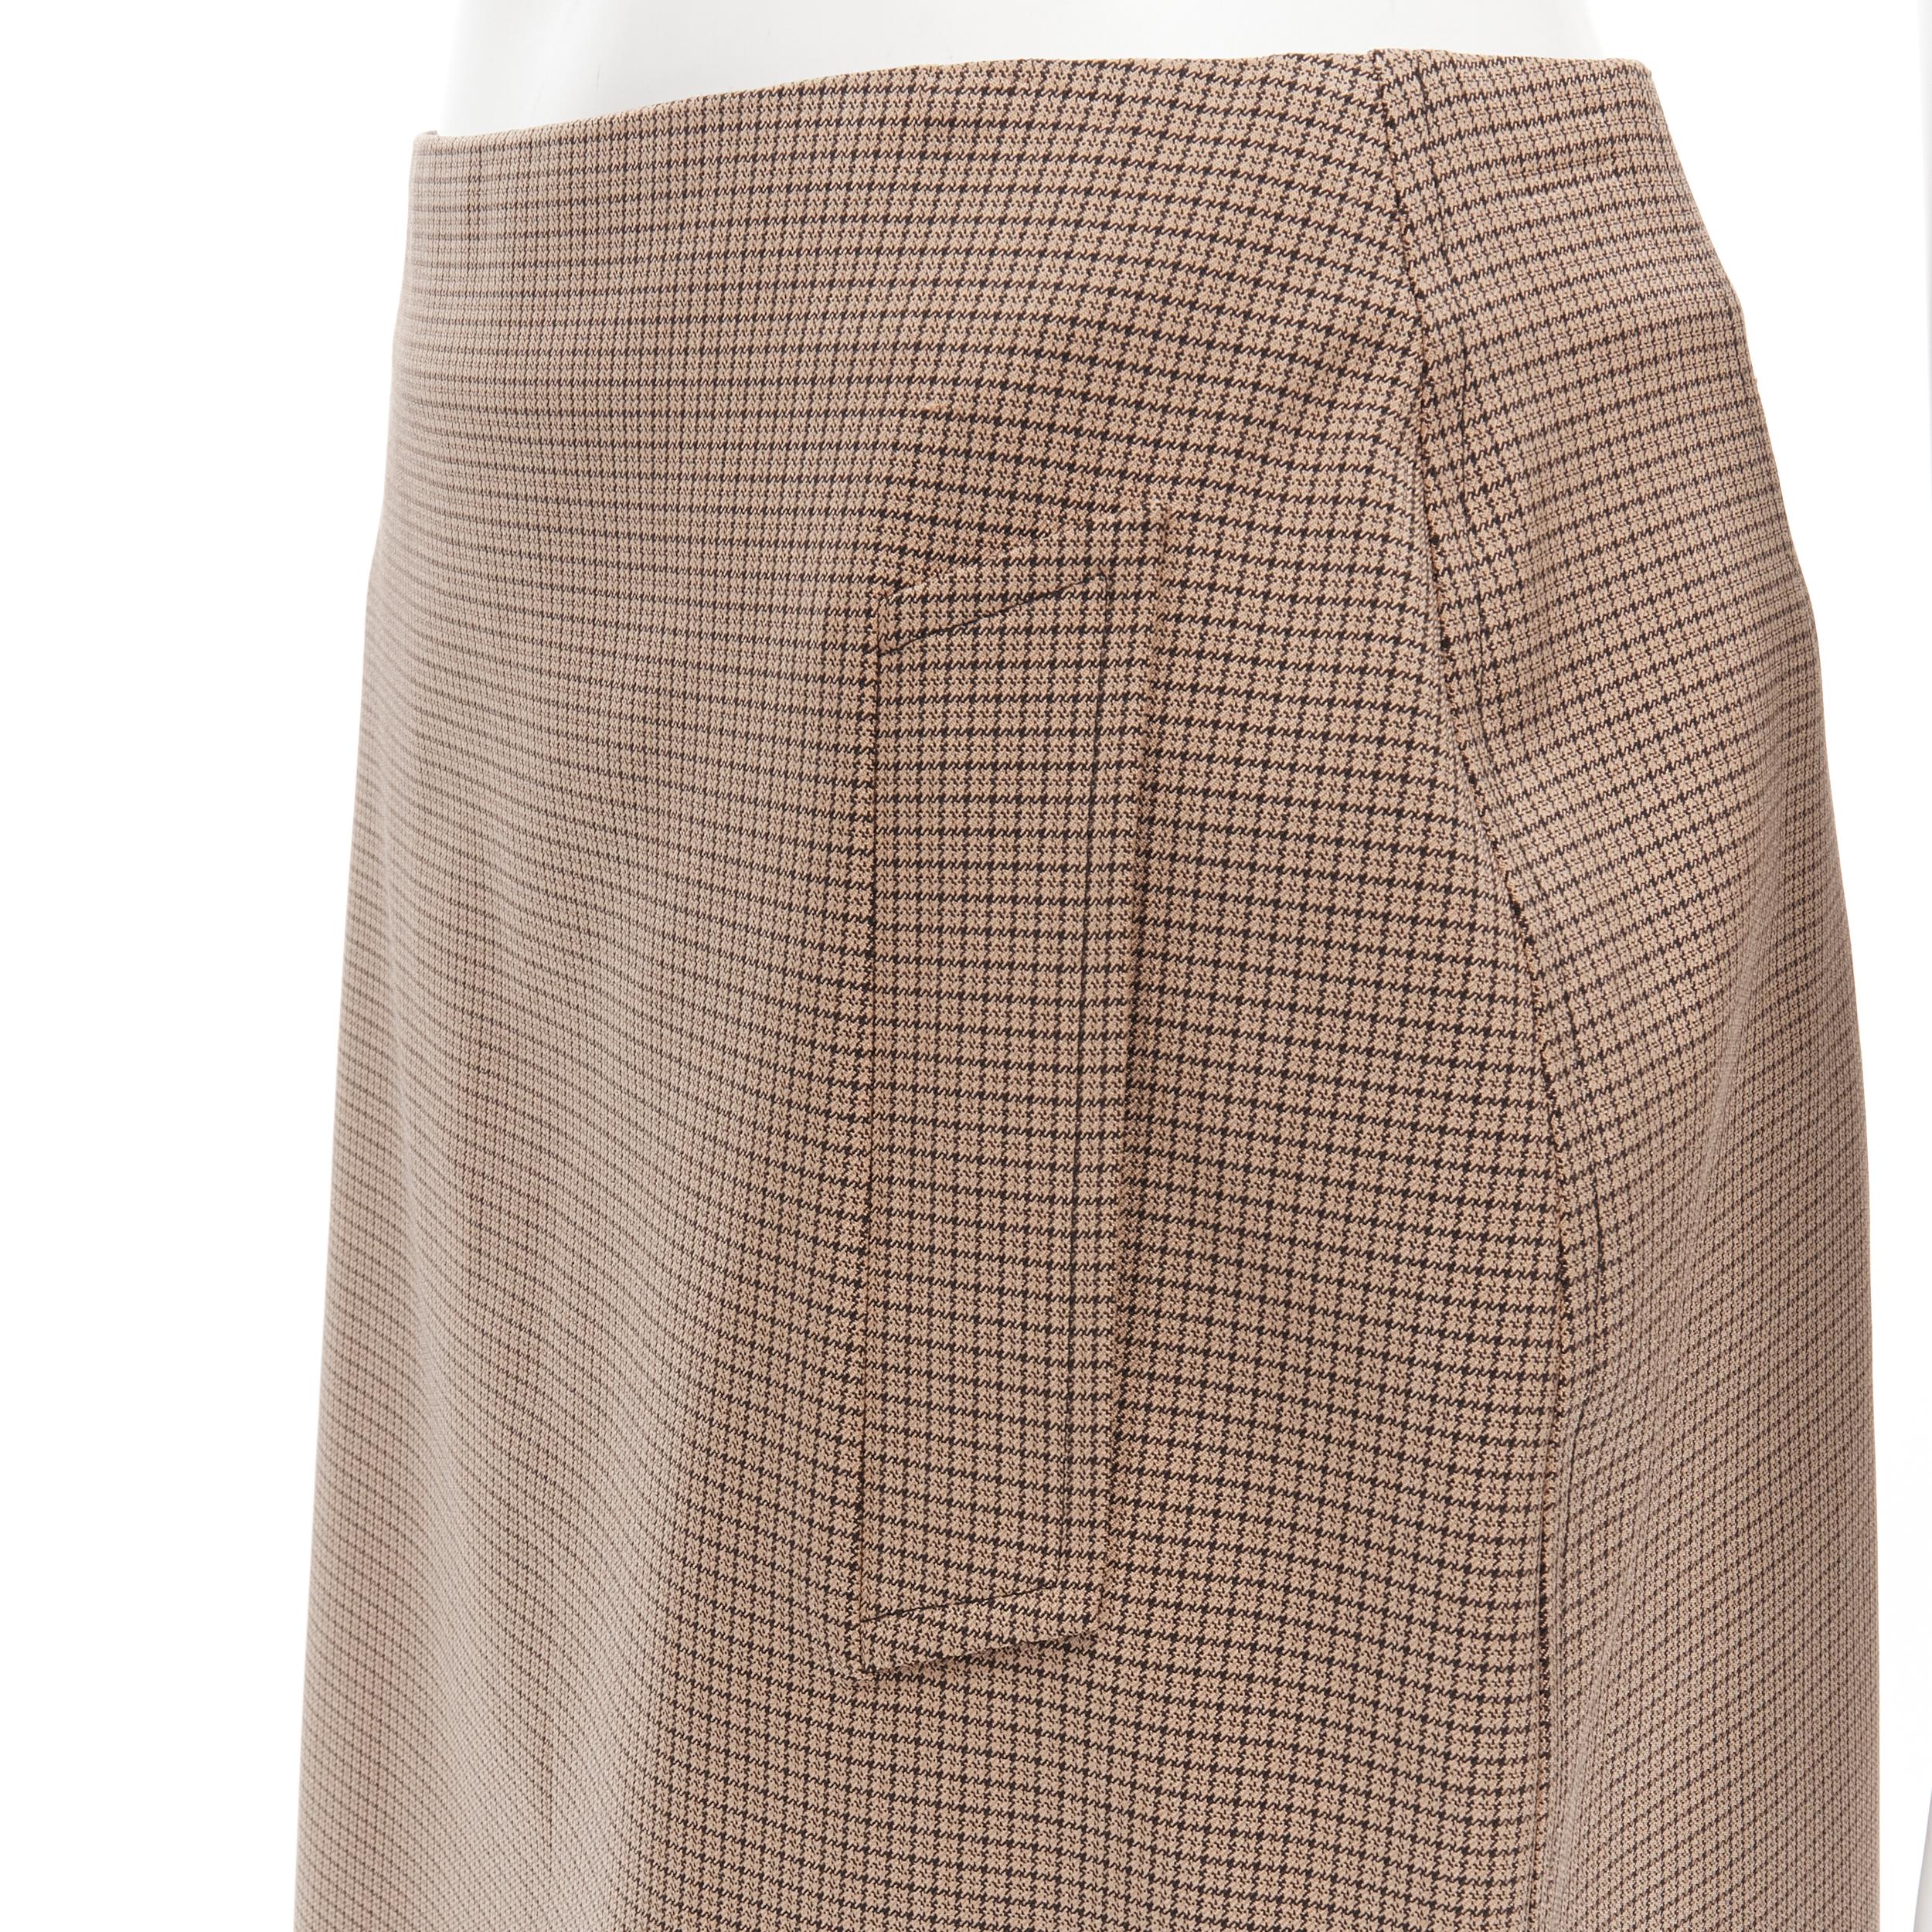 PRADA brown gingham check crepe dual pocket knee length skirt IT42 M 
Reference: JECN/A00012 
Brand: Prada 
Designer: Miuccia Prada 
Color: Brown 
Pattern: Check 
Closure: Zip 
Extra Detail: Dual front pockets. 

CONDITION: 
Condition: Excellent,